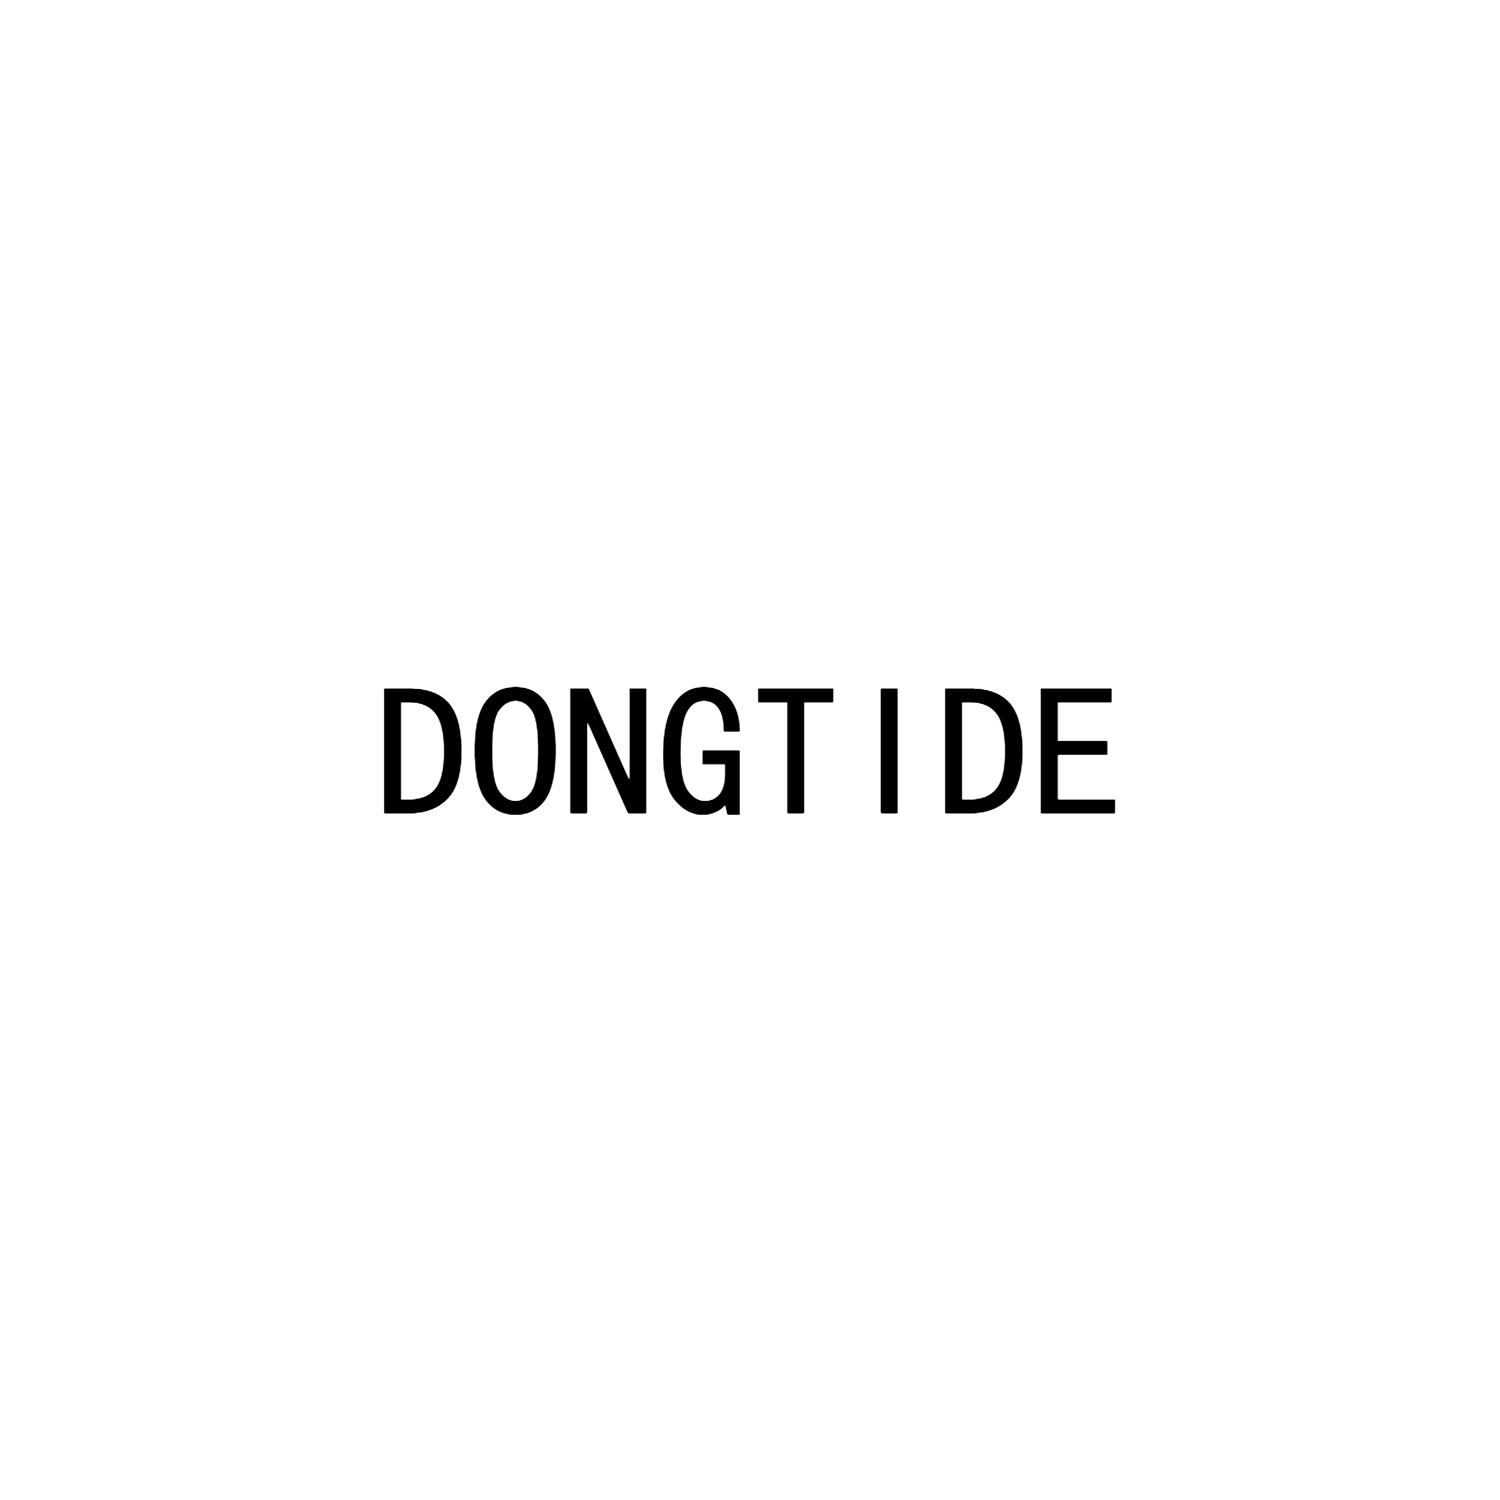 DONGTIDE